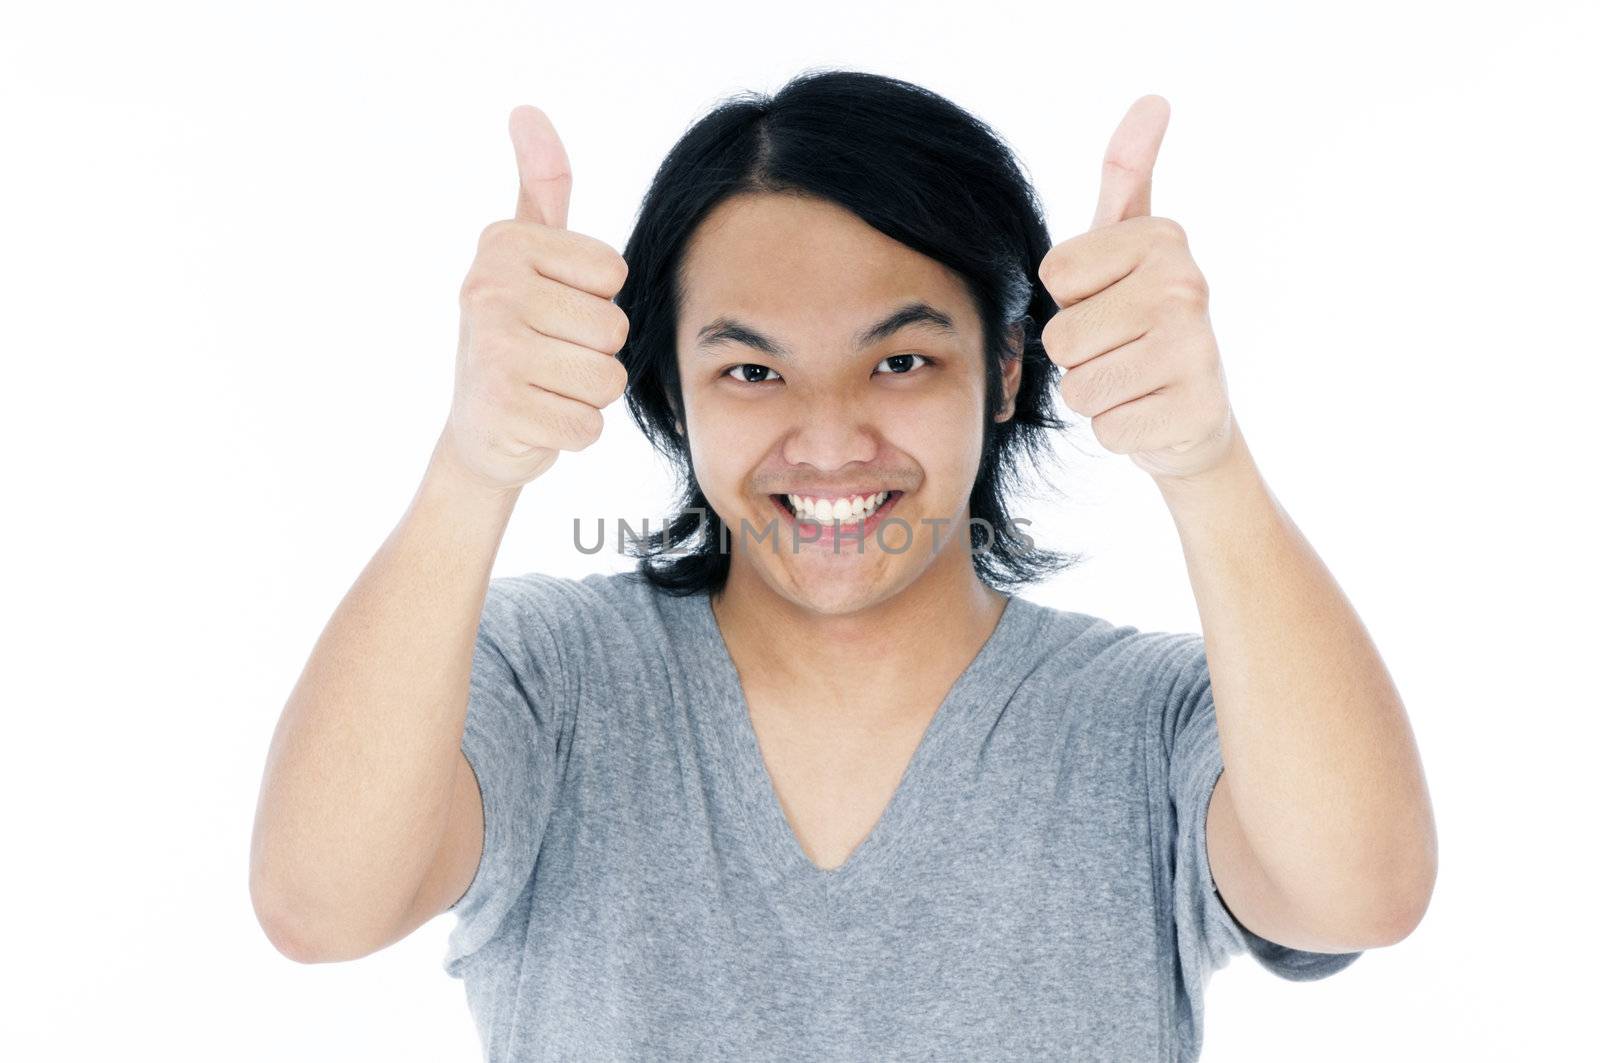 Portrait of a happy young Asian man giving thumbs up sign over white background.